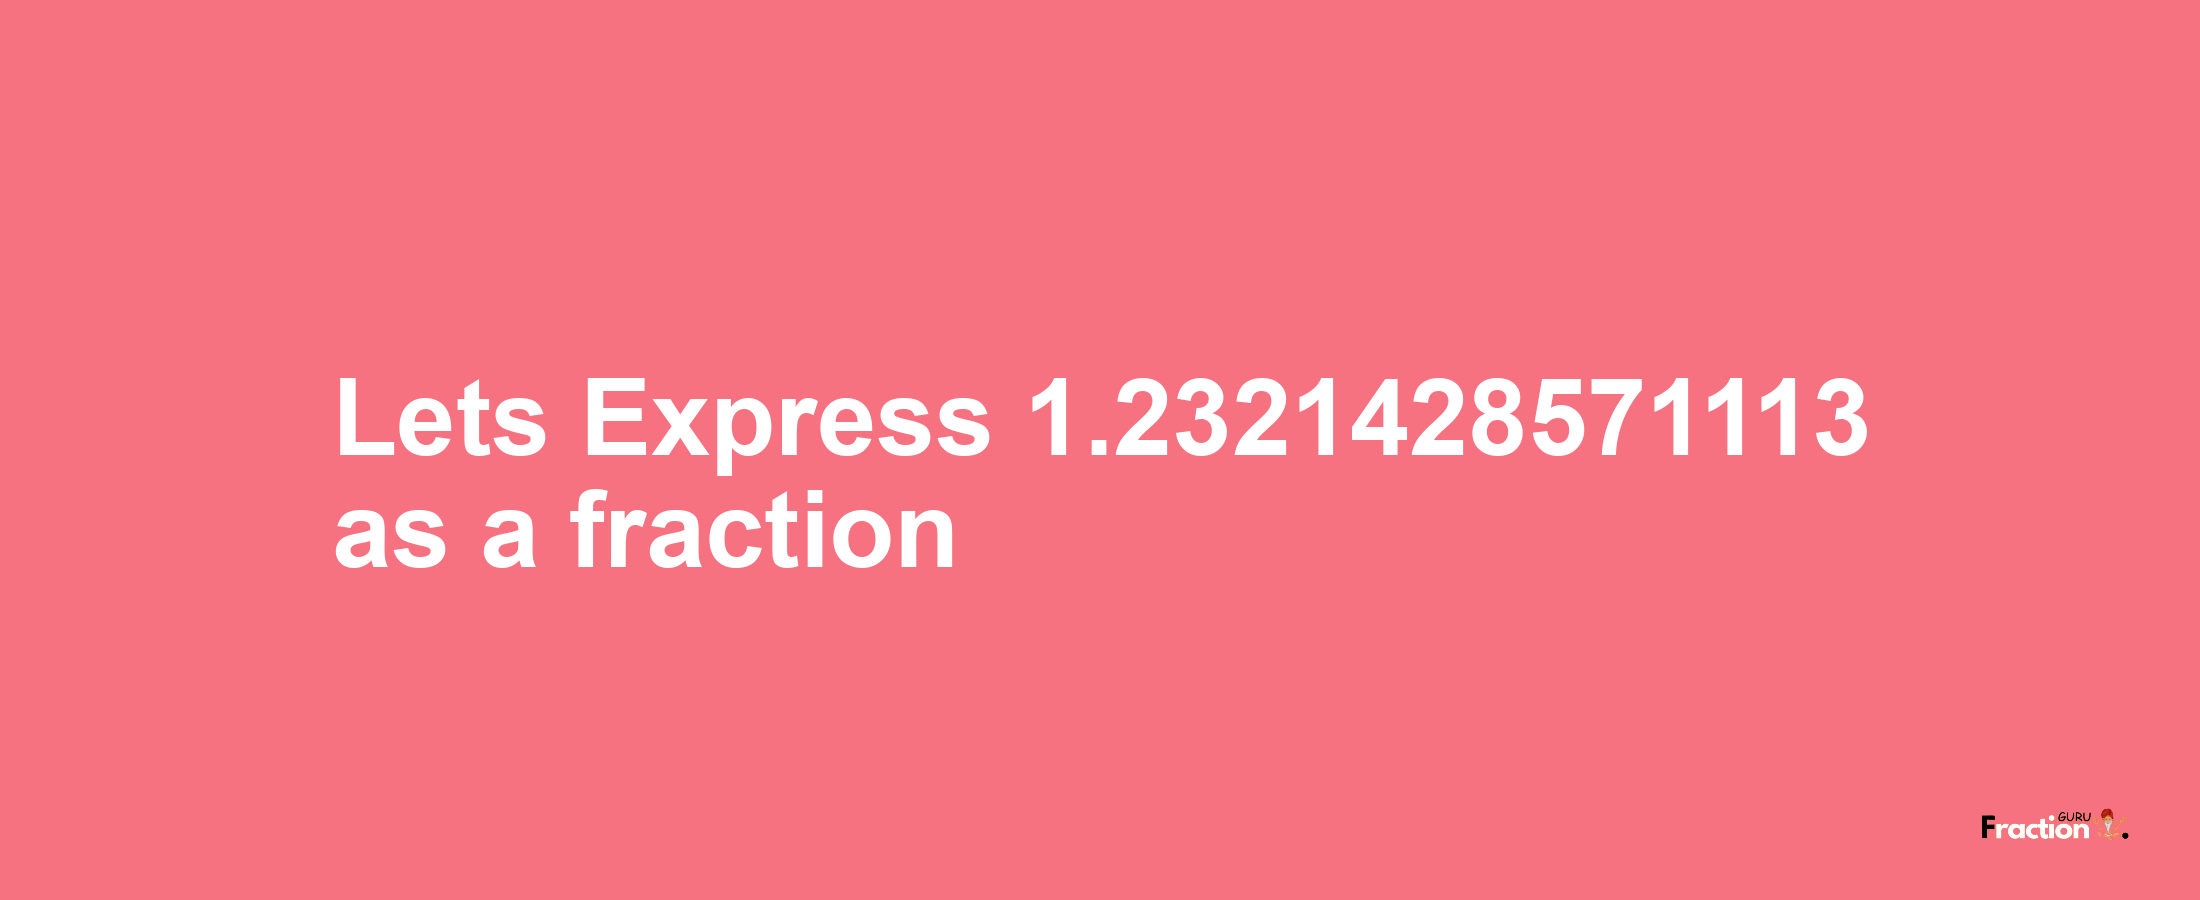 Lets Express 1.2321428571113 as afraction